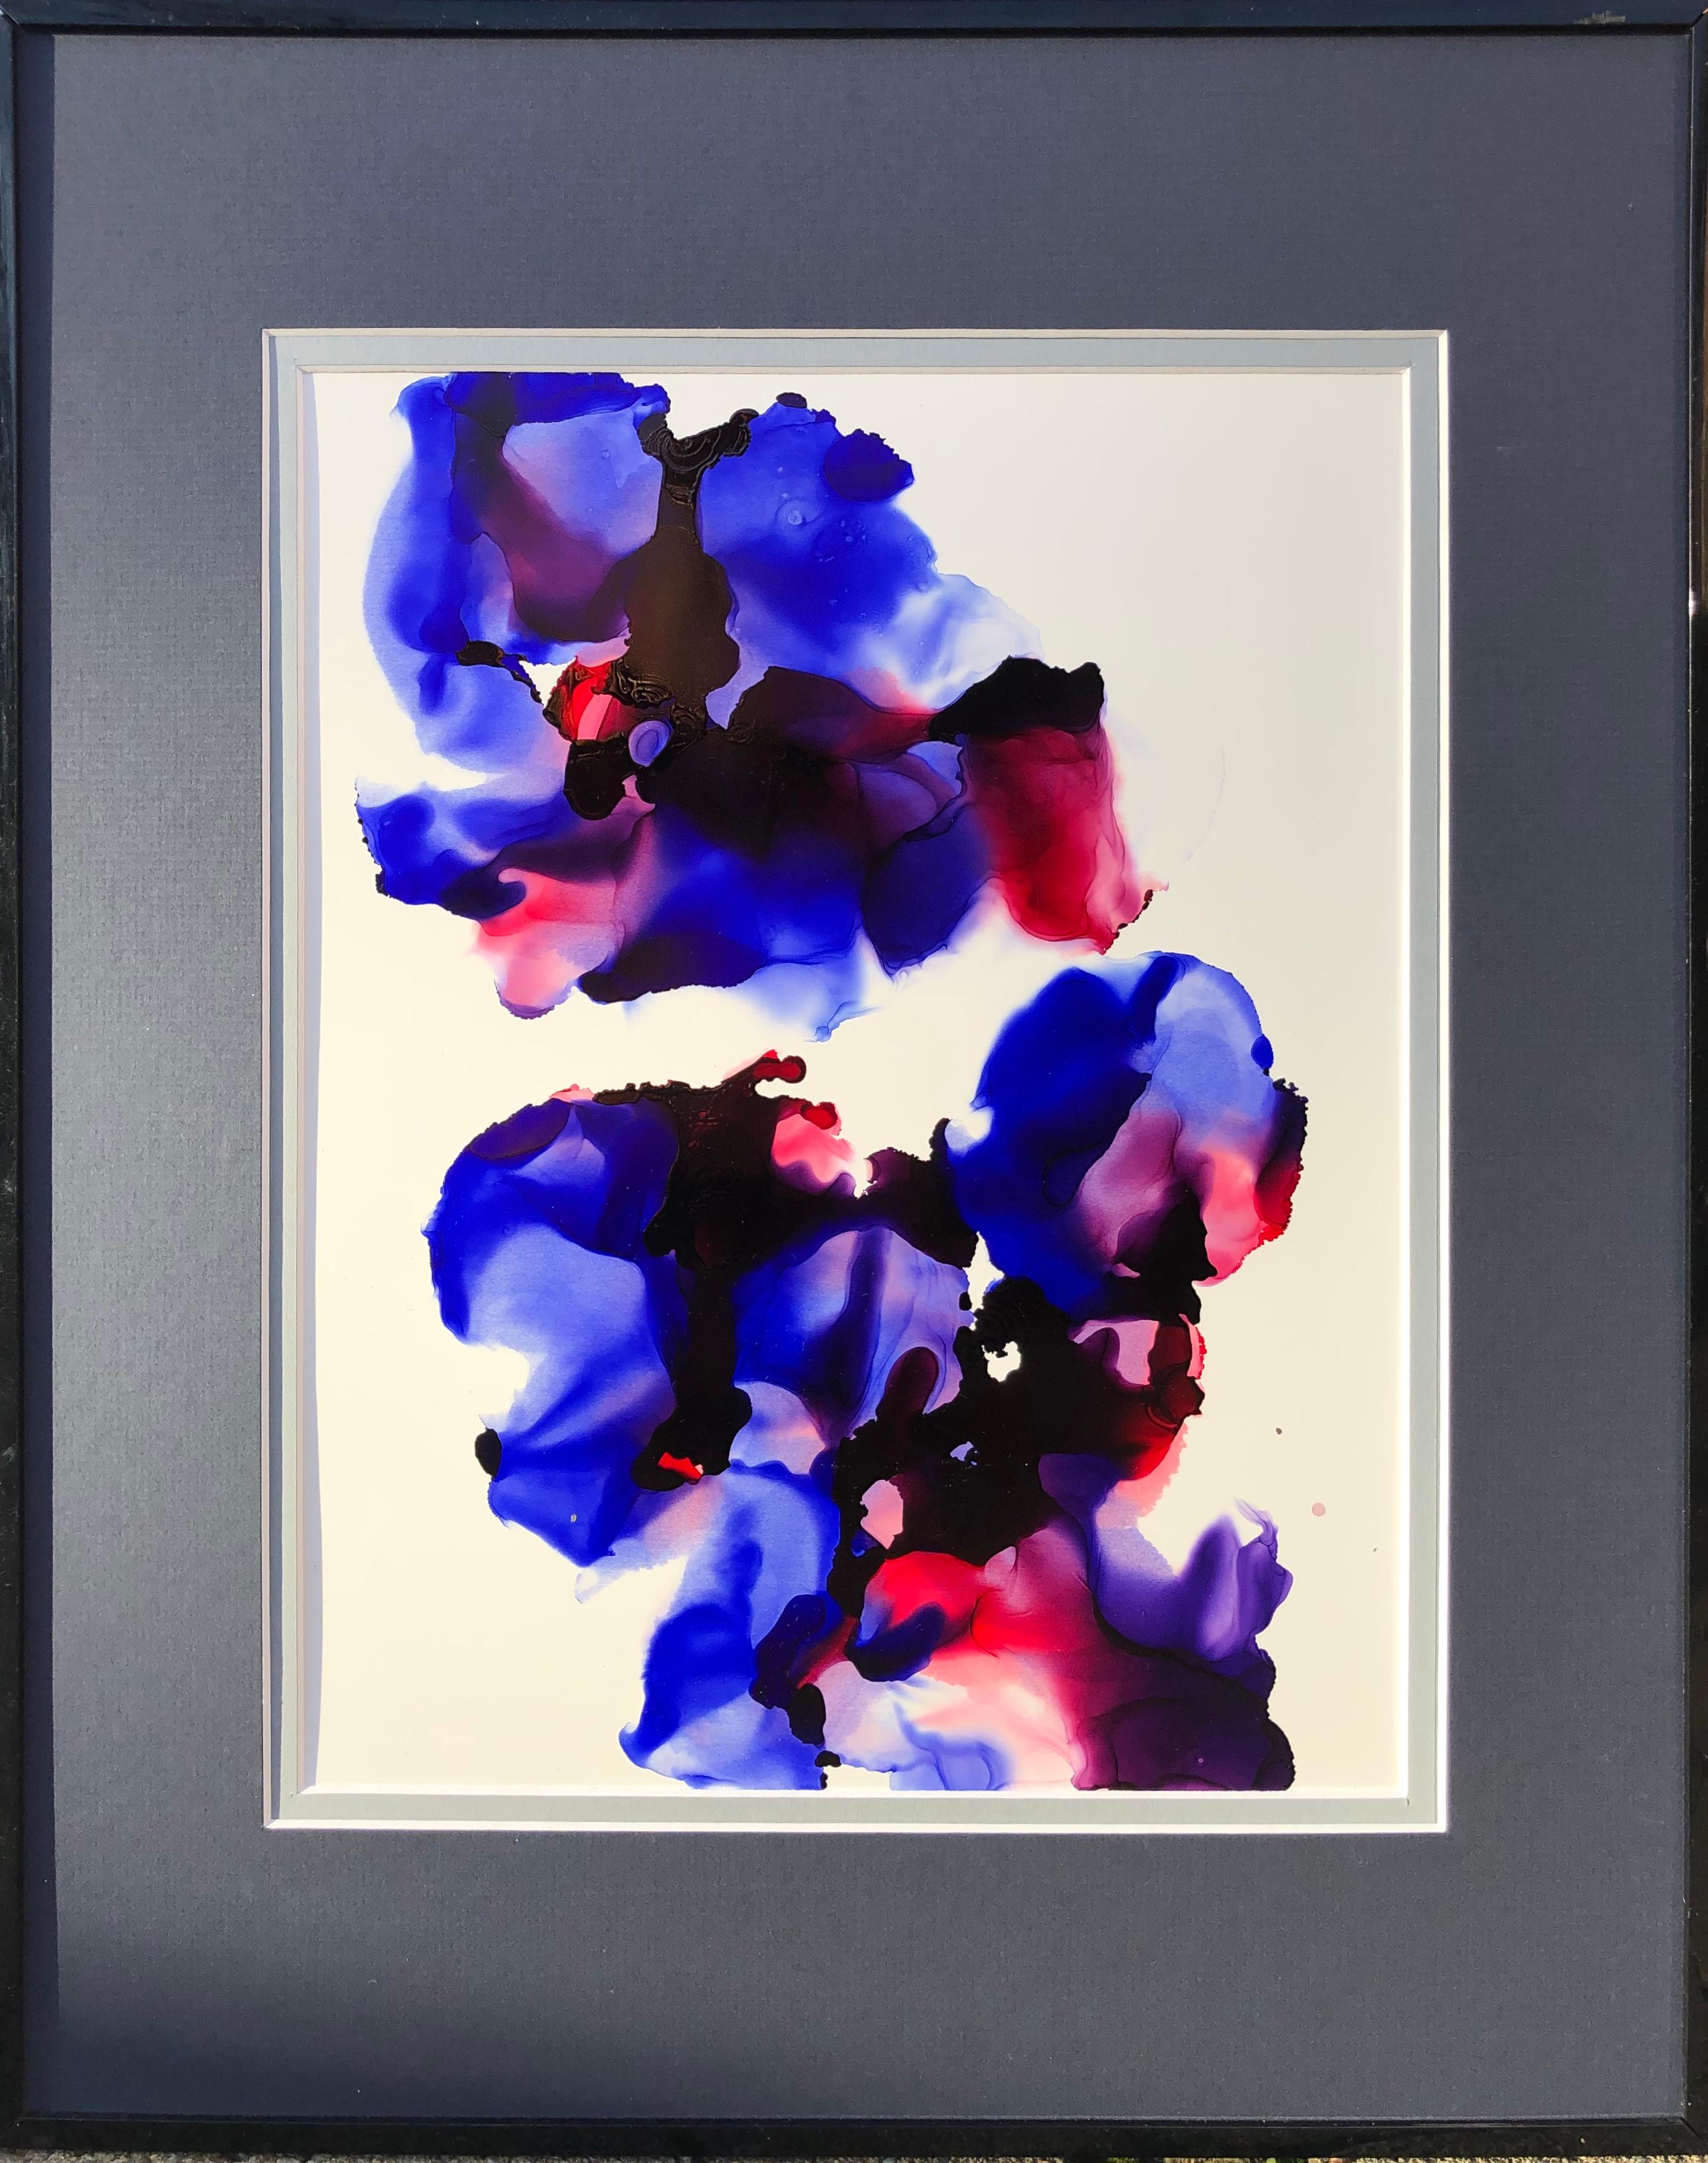 Mila Akopova Abstract Drawing – Iris-abstraction art, made in ultramarine blue, red color